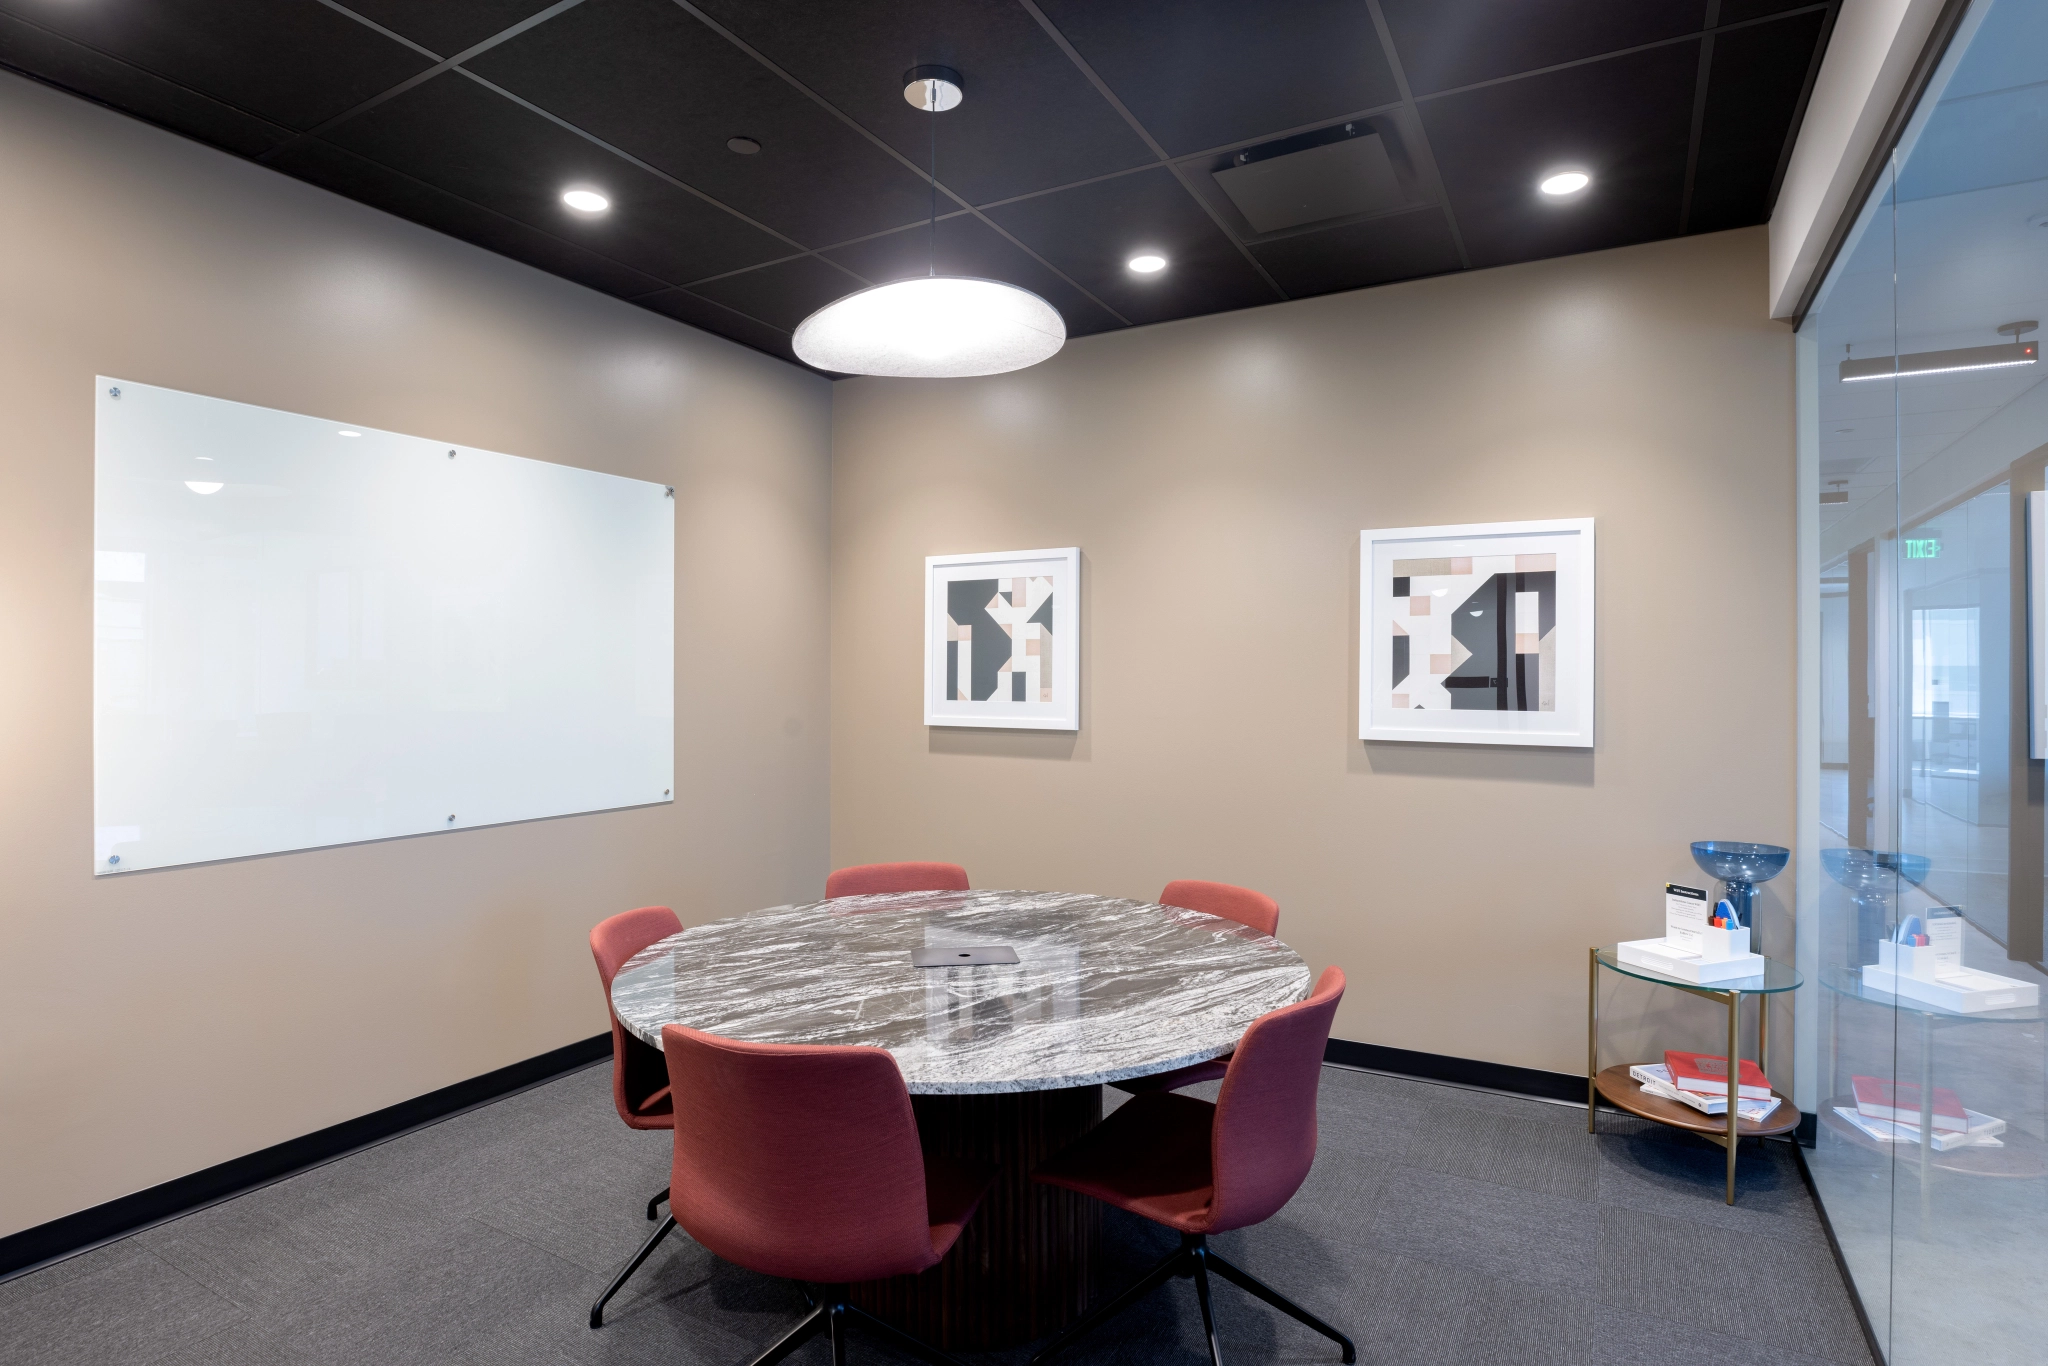 A meeting room with a round table for collaborative workspace in an office setting.